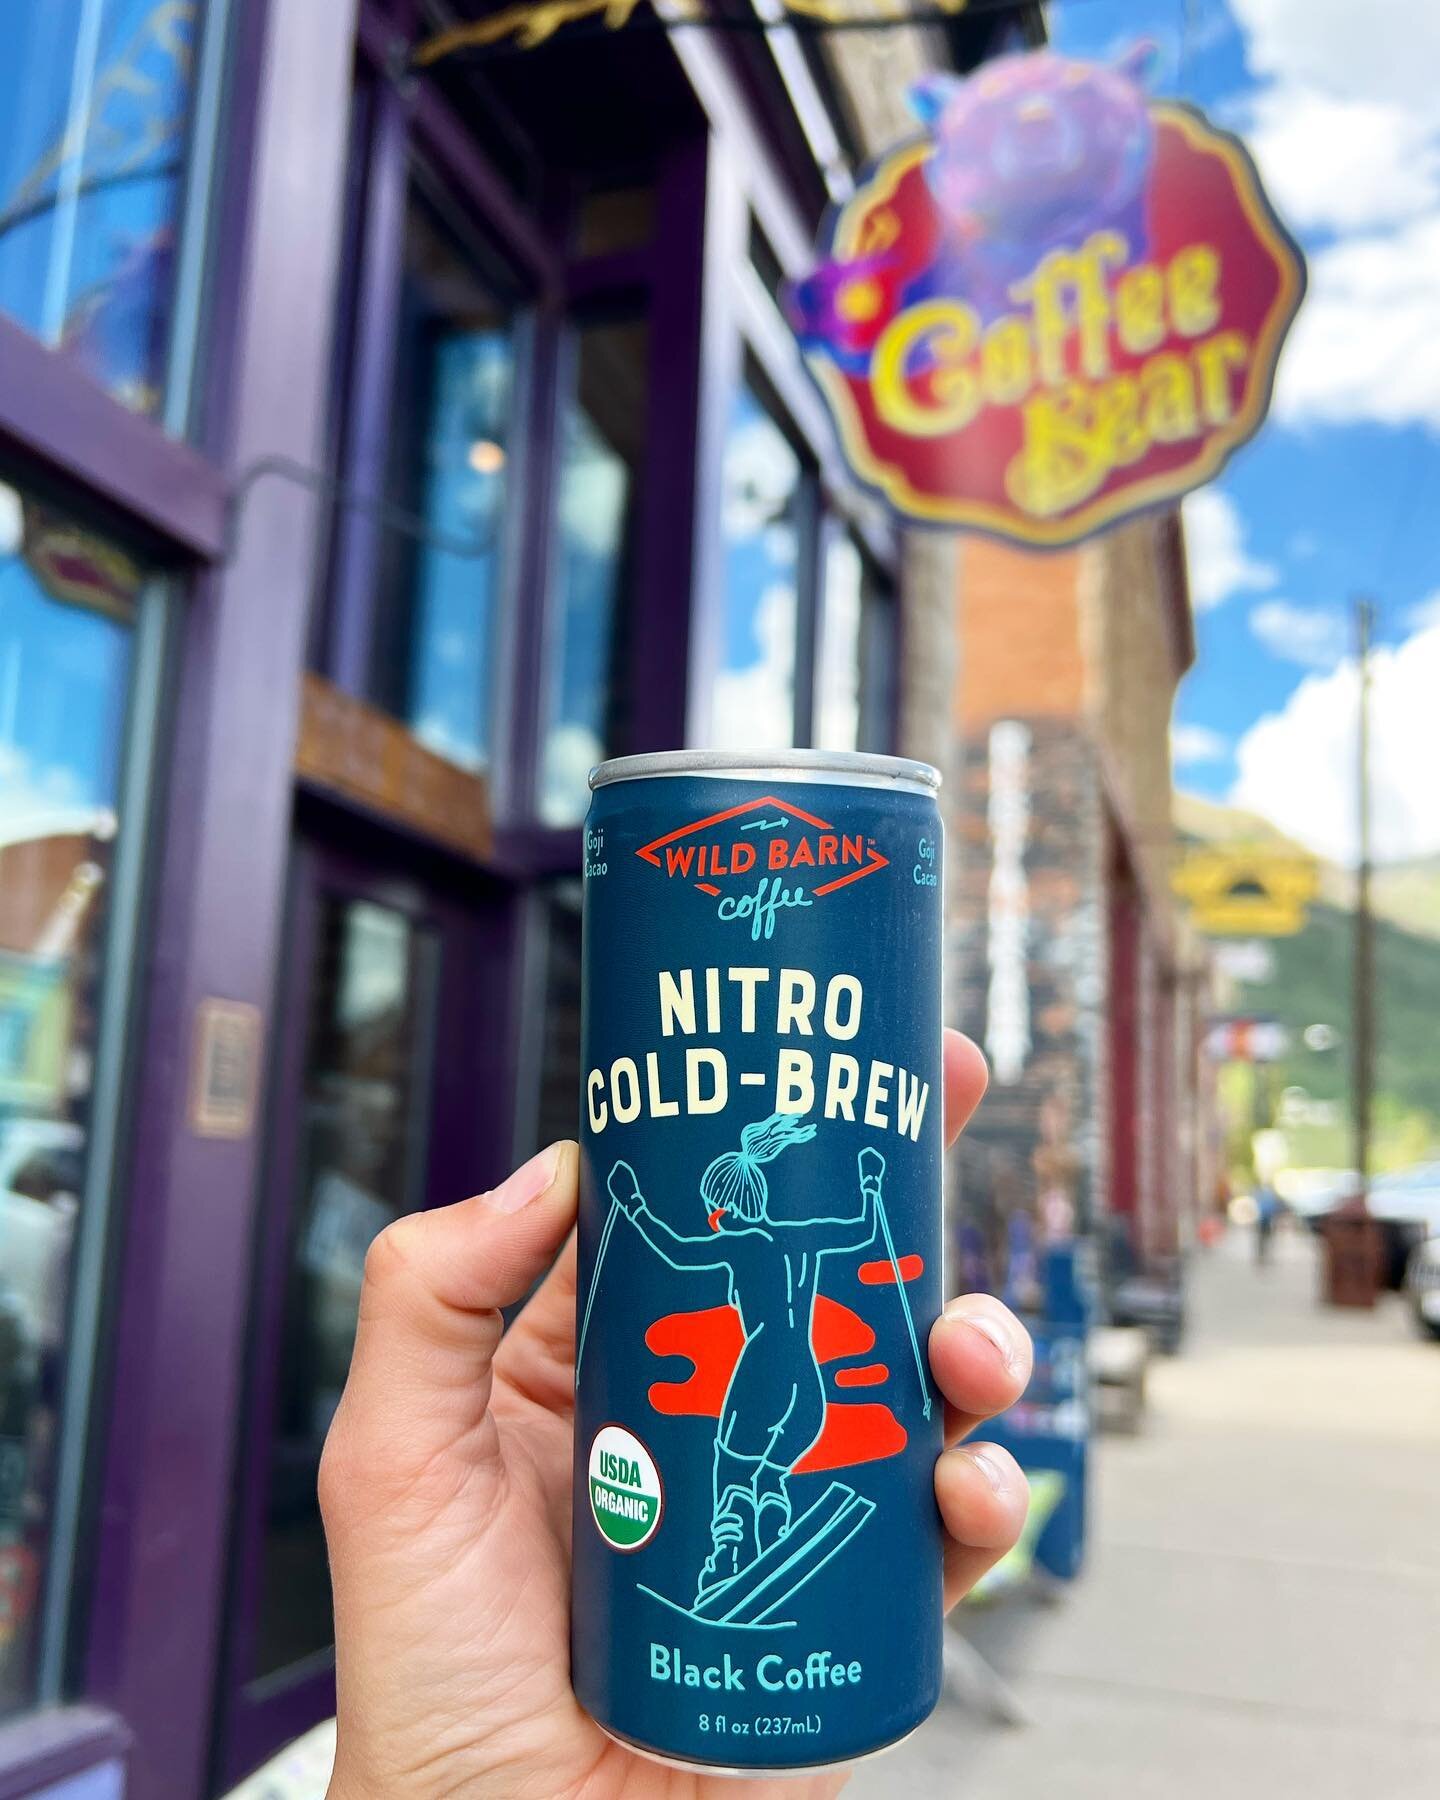 We 🤍 @wildbarncoffee, yes we do! We 🤍 @wildbarncoffee, how bout you?

Now serving canned Nitro Cold Brew from Wild Barn 🥳